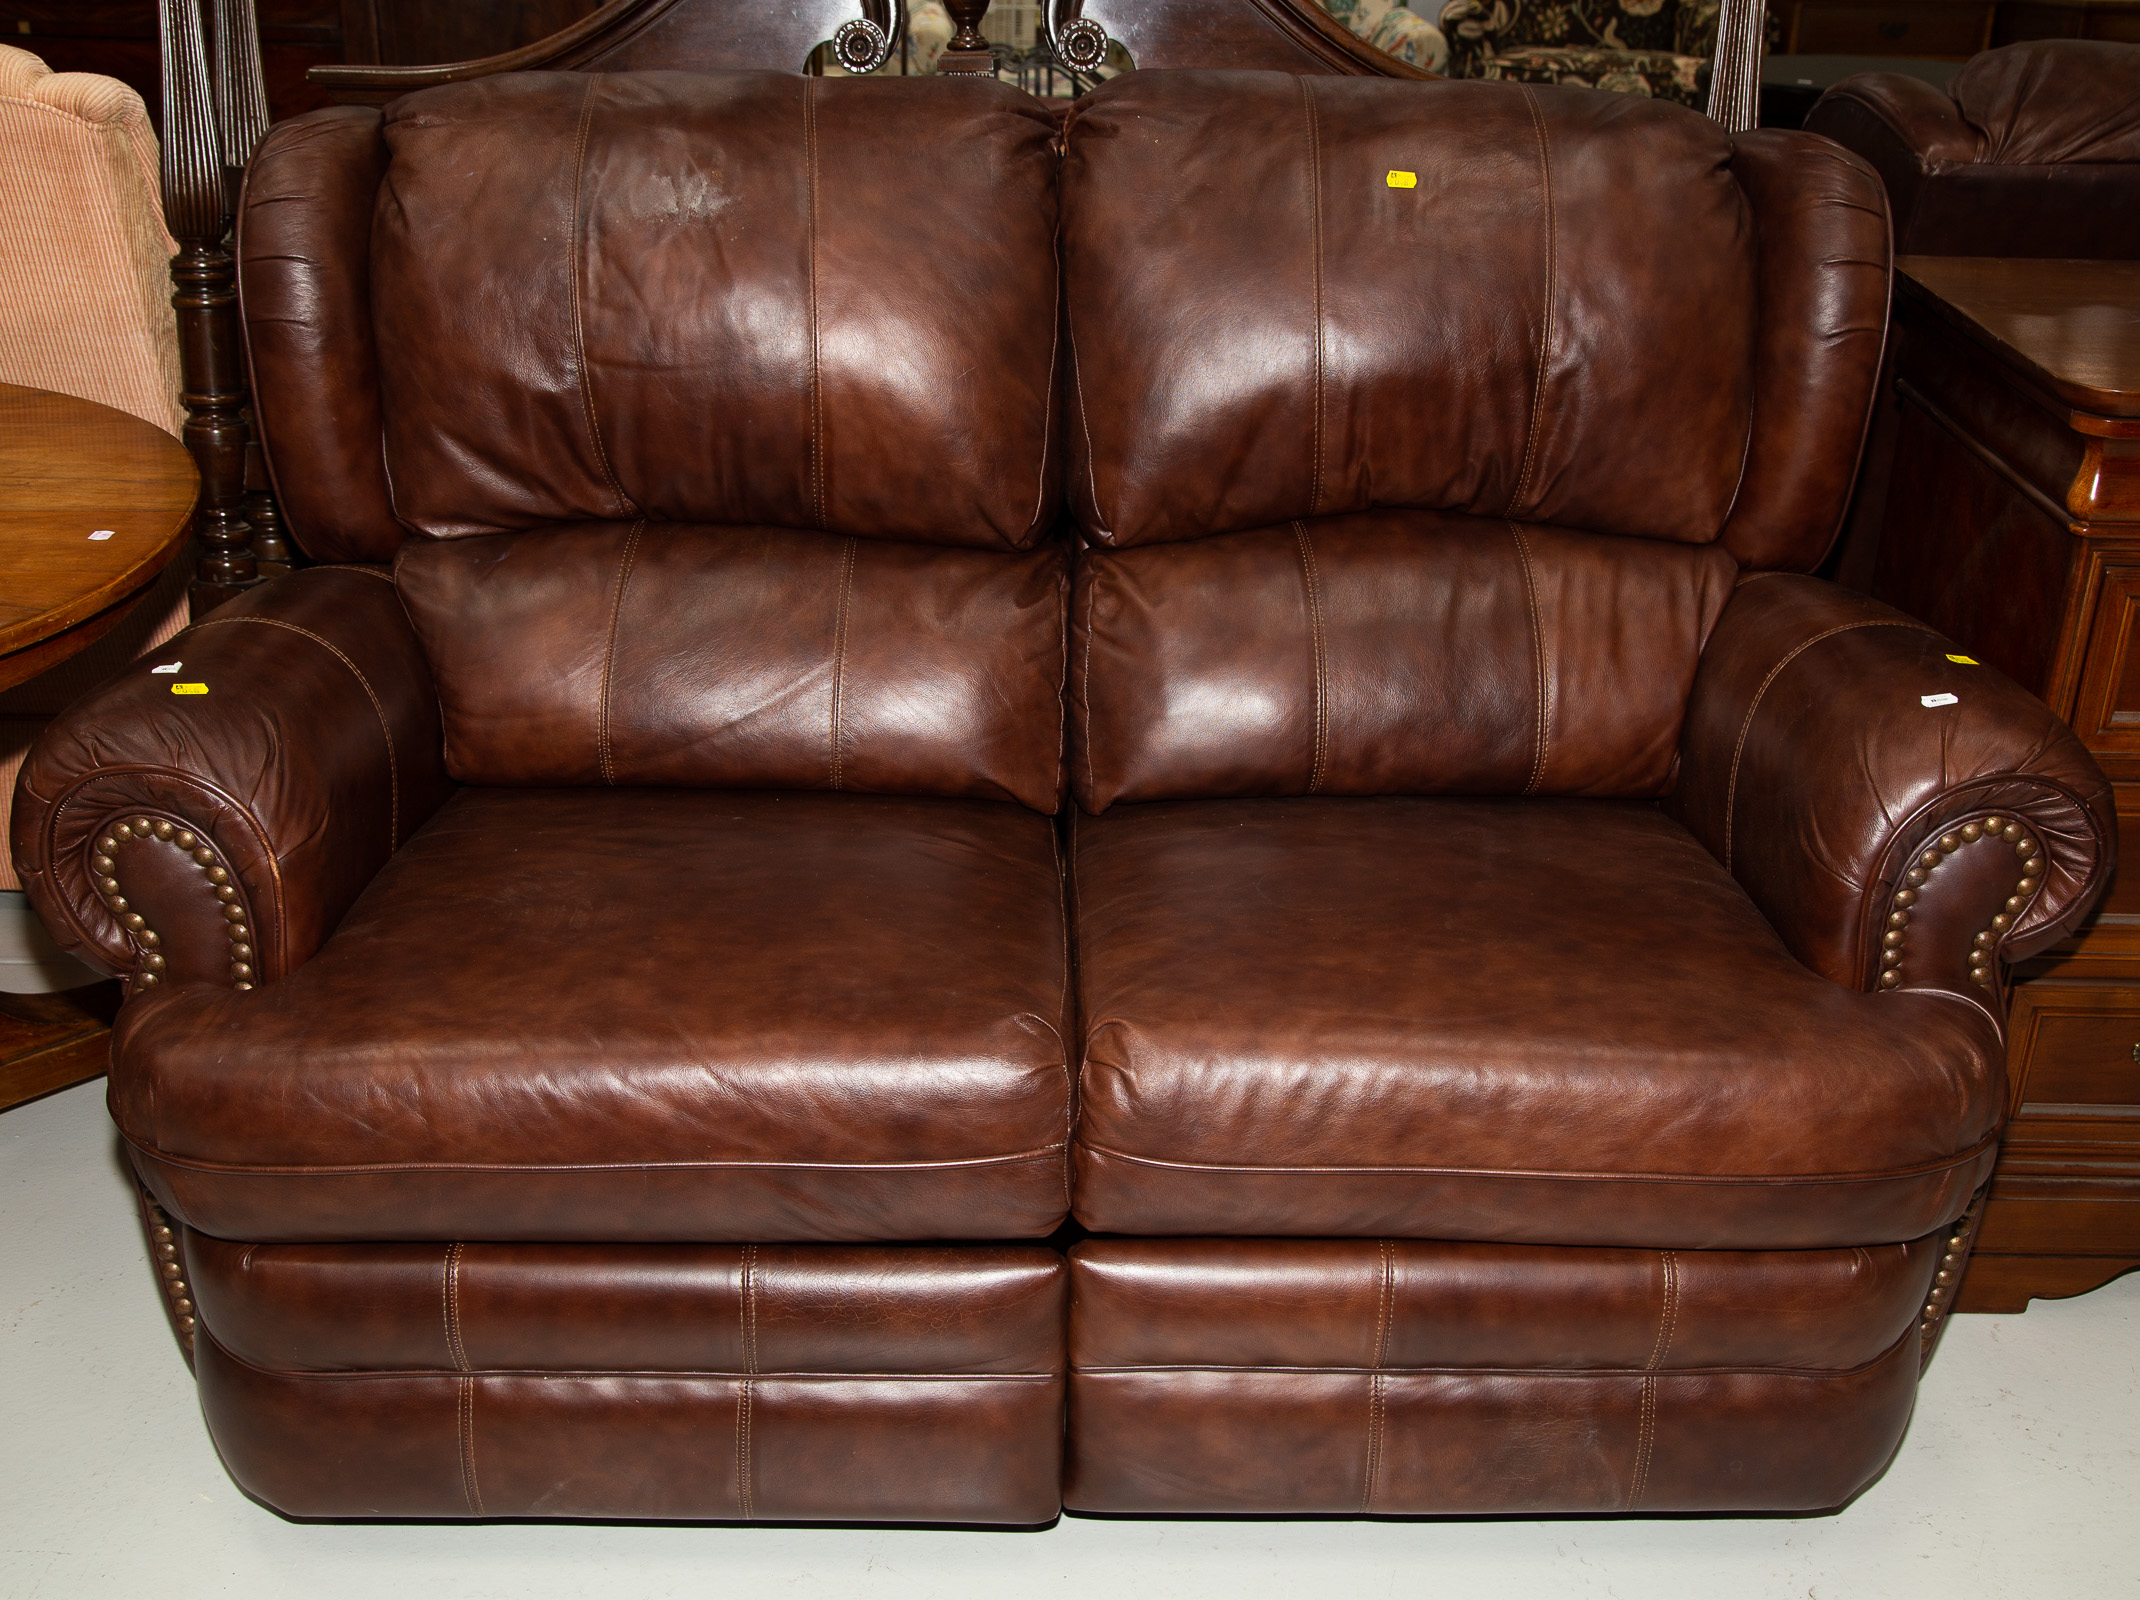 MODERN LEATHER TWO SEAT RECLINER 287fb0